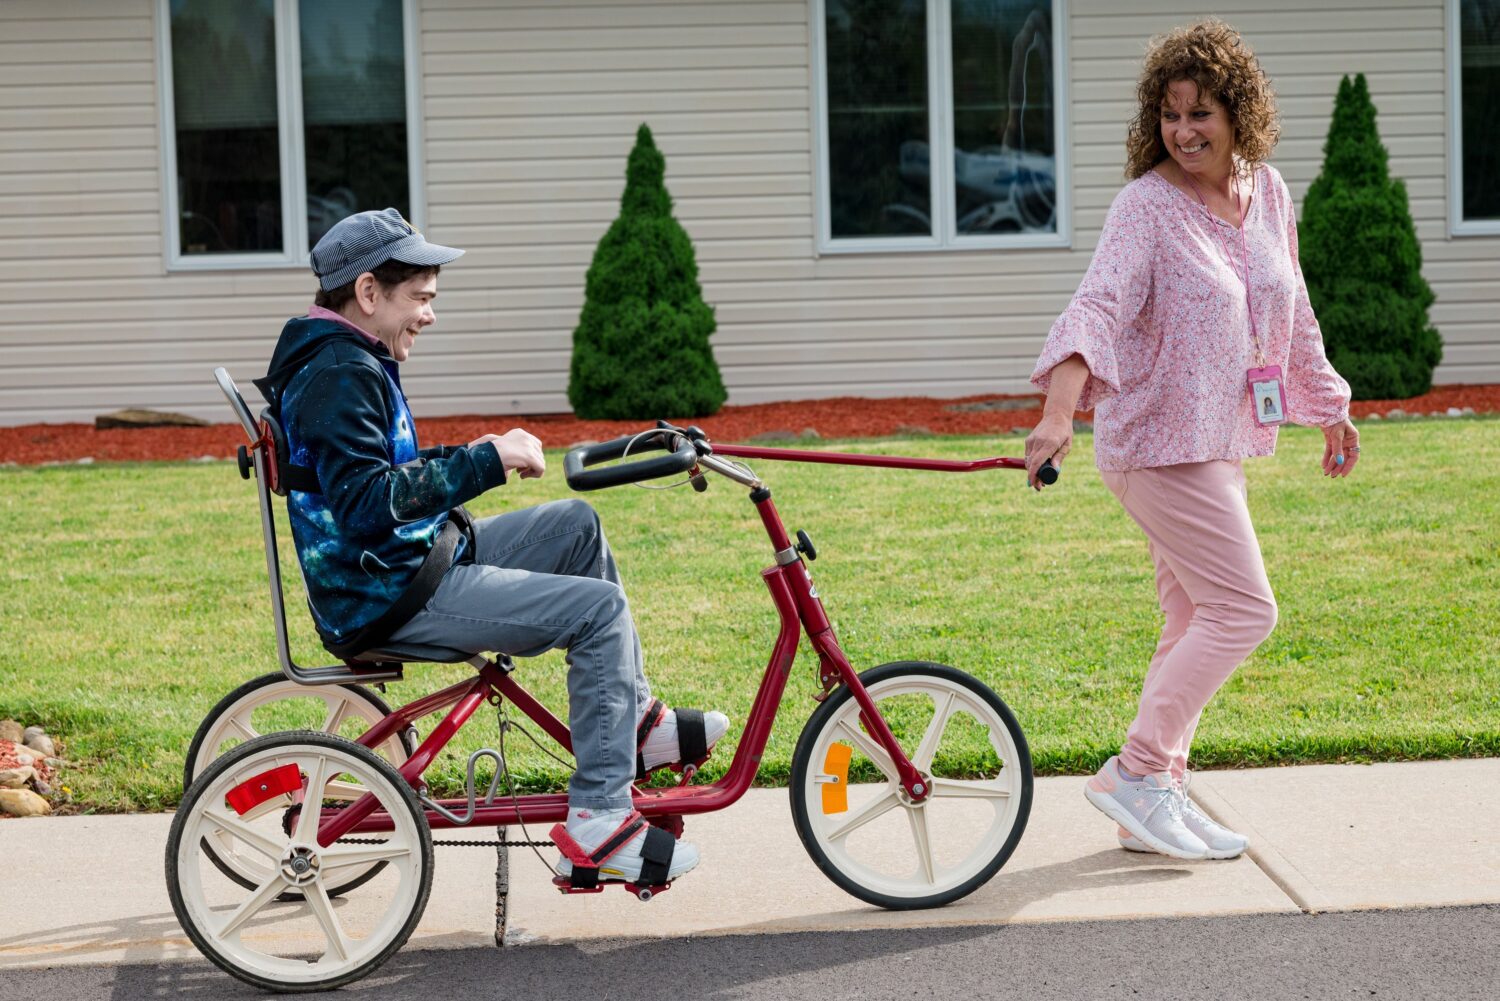 A McGuire Memorial program instructor helping a LEAP participant ride a bike outside.